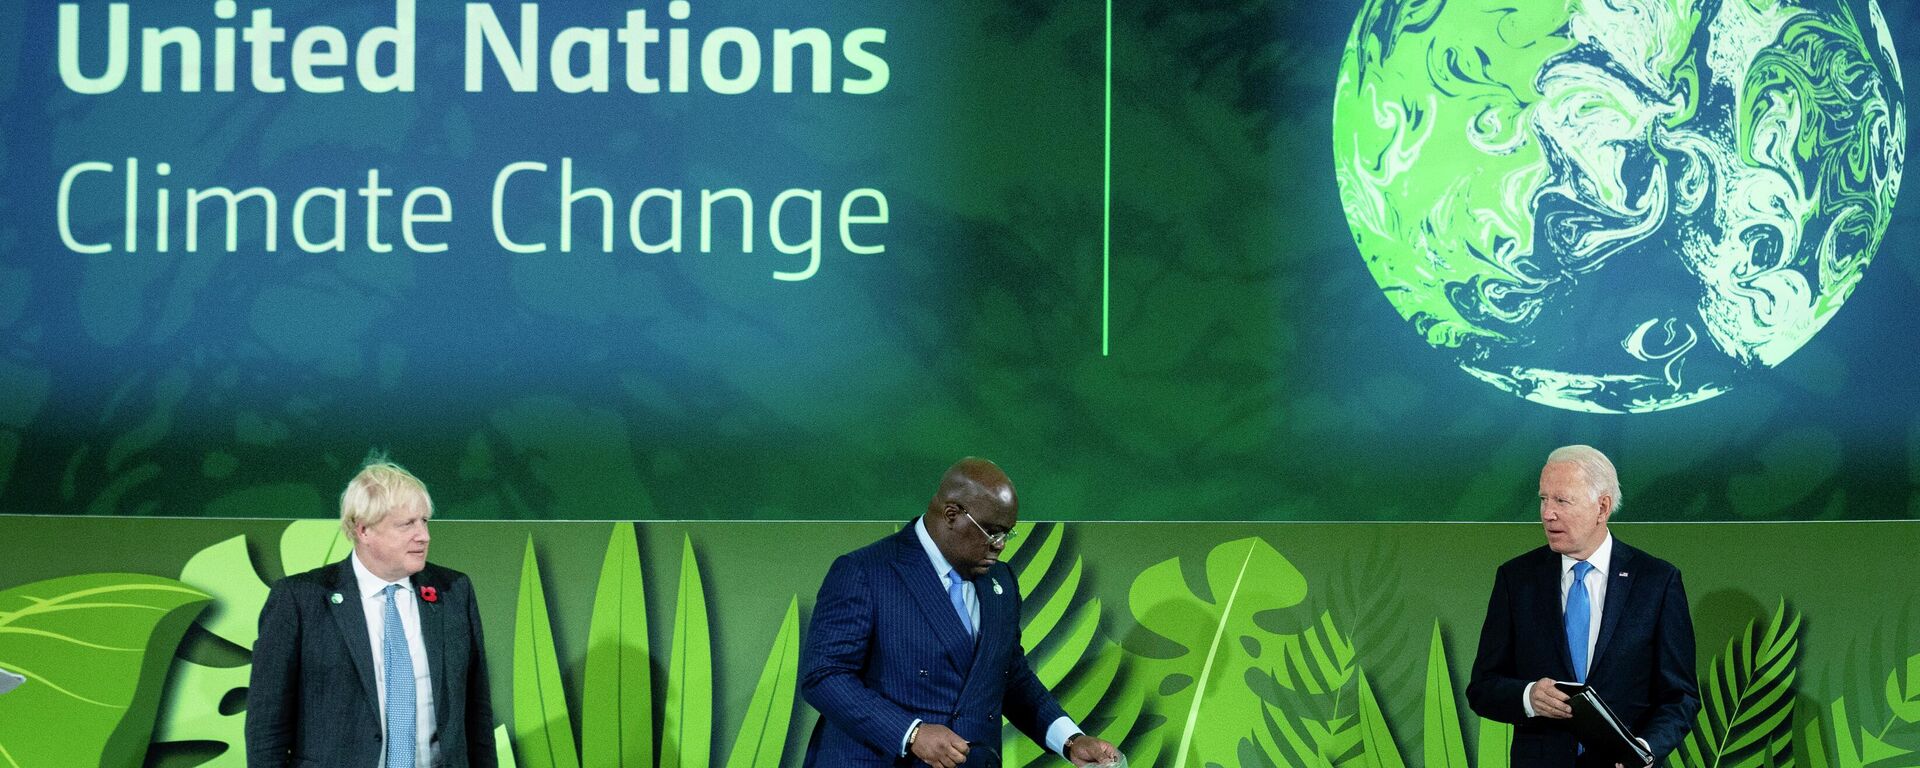 British Prime Minister Boris Johnson, President of Congo Felix Tshisekedi and President Joe Biden stand before speaking at a session on Action on Forests and Land Use, during the UN Climate Change Conference COP26 in Glasgow, Scotland, Tuesday, Nov. 2, 2021.  (Erin Schaff/The New York Times via AP, Pool) - Sputnik International, 1920, 25.10.2022